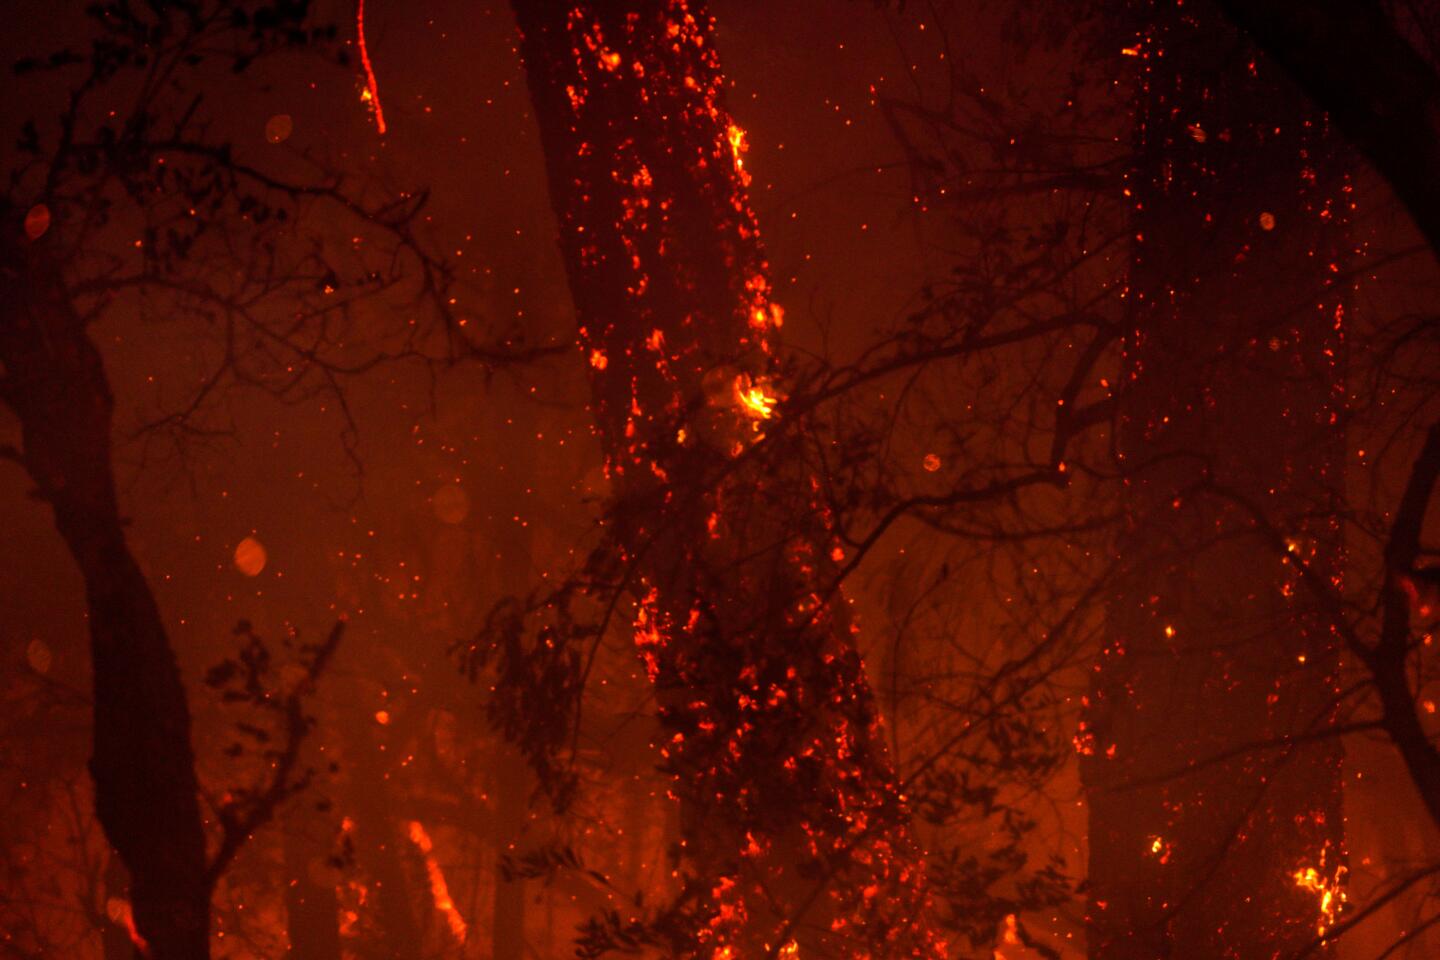 A closeup shows a tree lighted by flaming embers in the night.